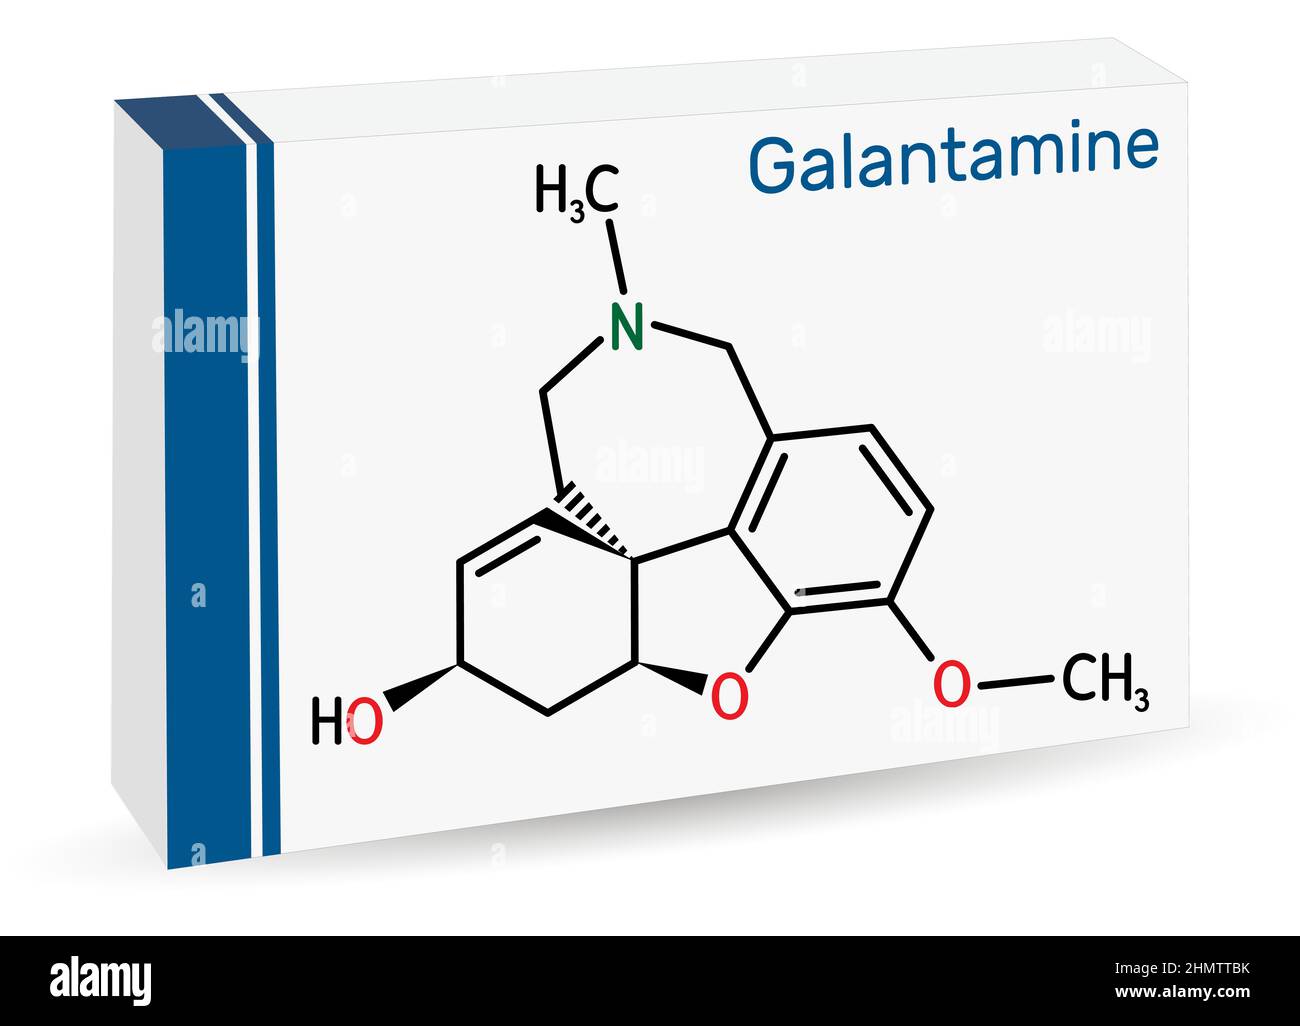 Galantamine molecule. It is tertiary alkaloid, used to trate dementia, Alzheimer's disease. Skeletal chemical formula. Paper packaging for drugs. Vect Stock Vector